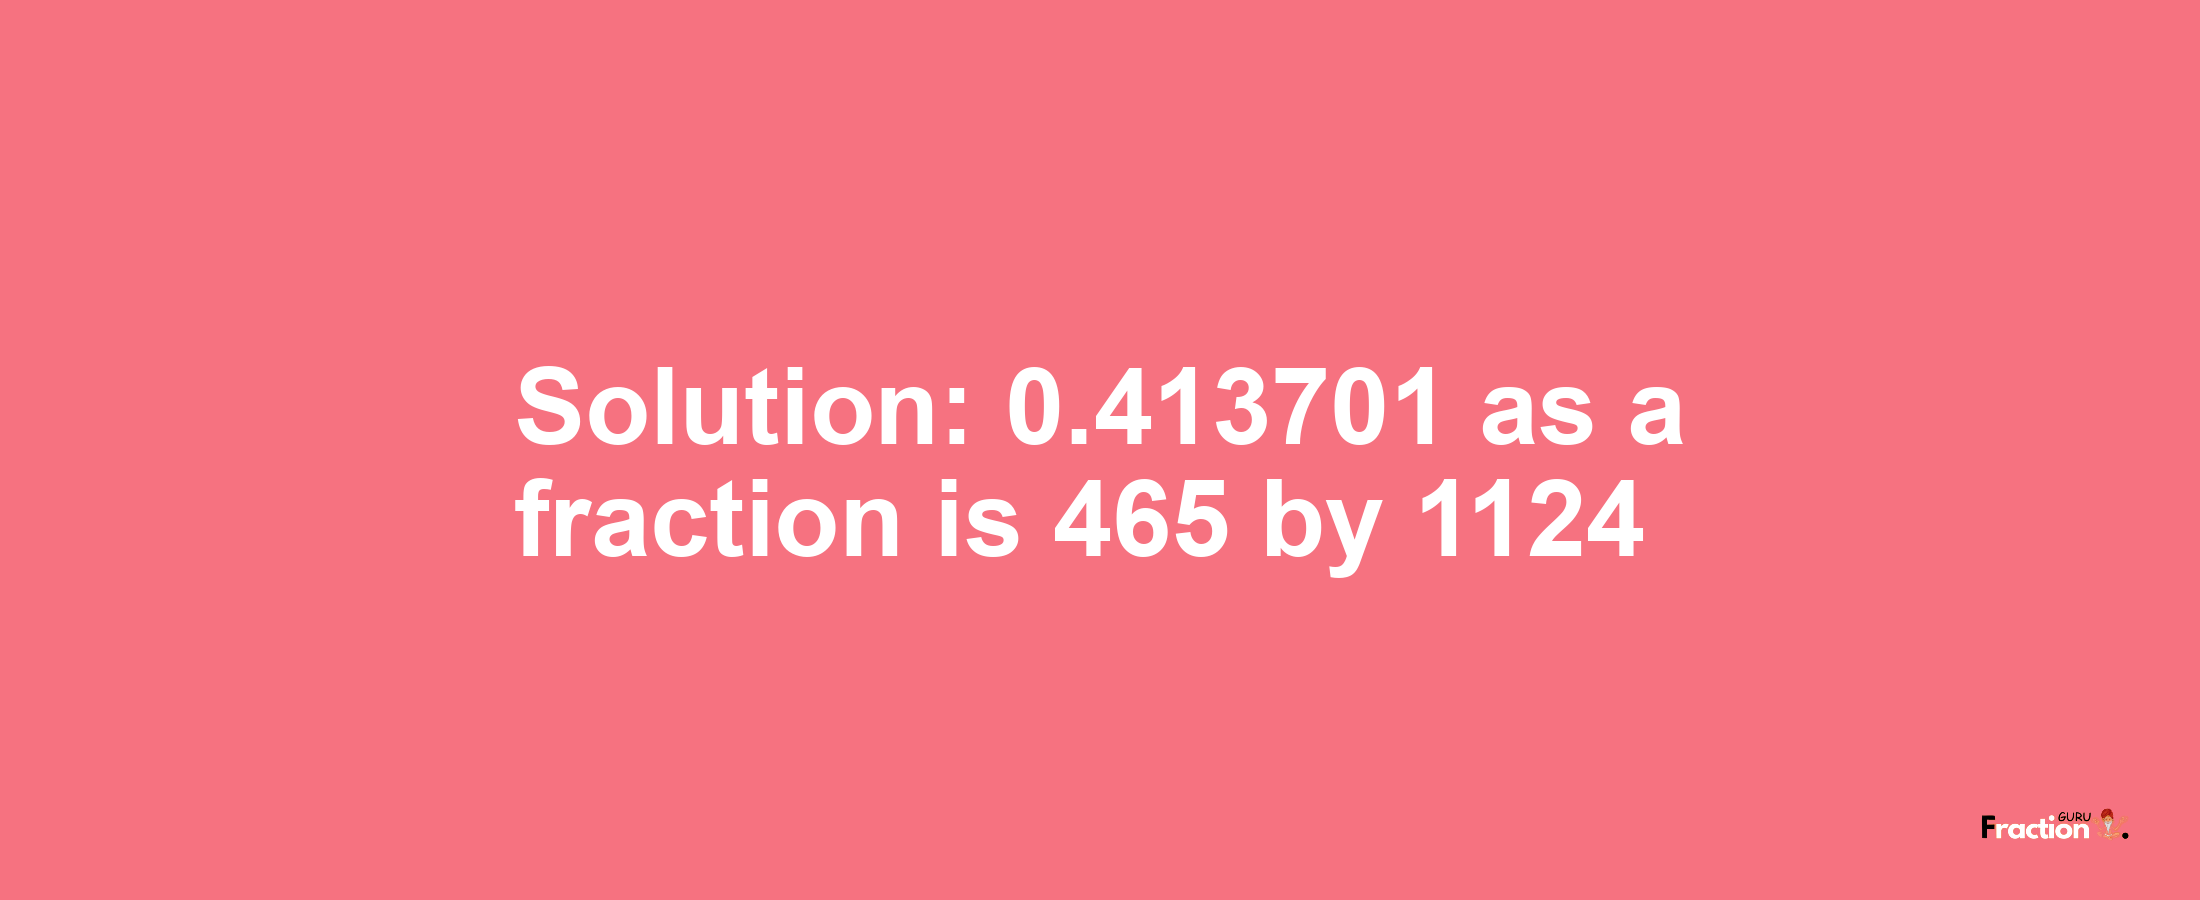 Solution:0.413701 as a fraction is 465/1124